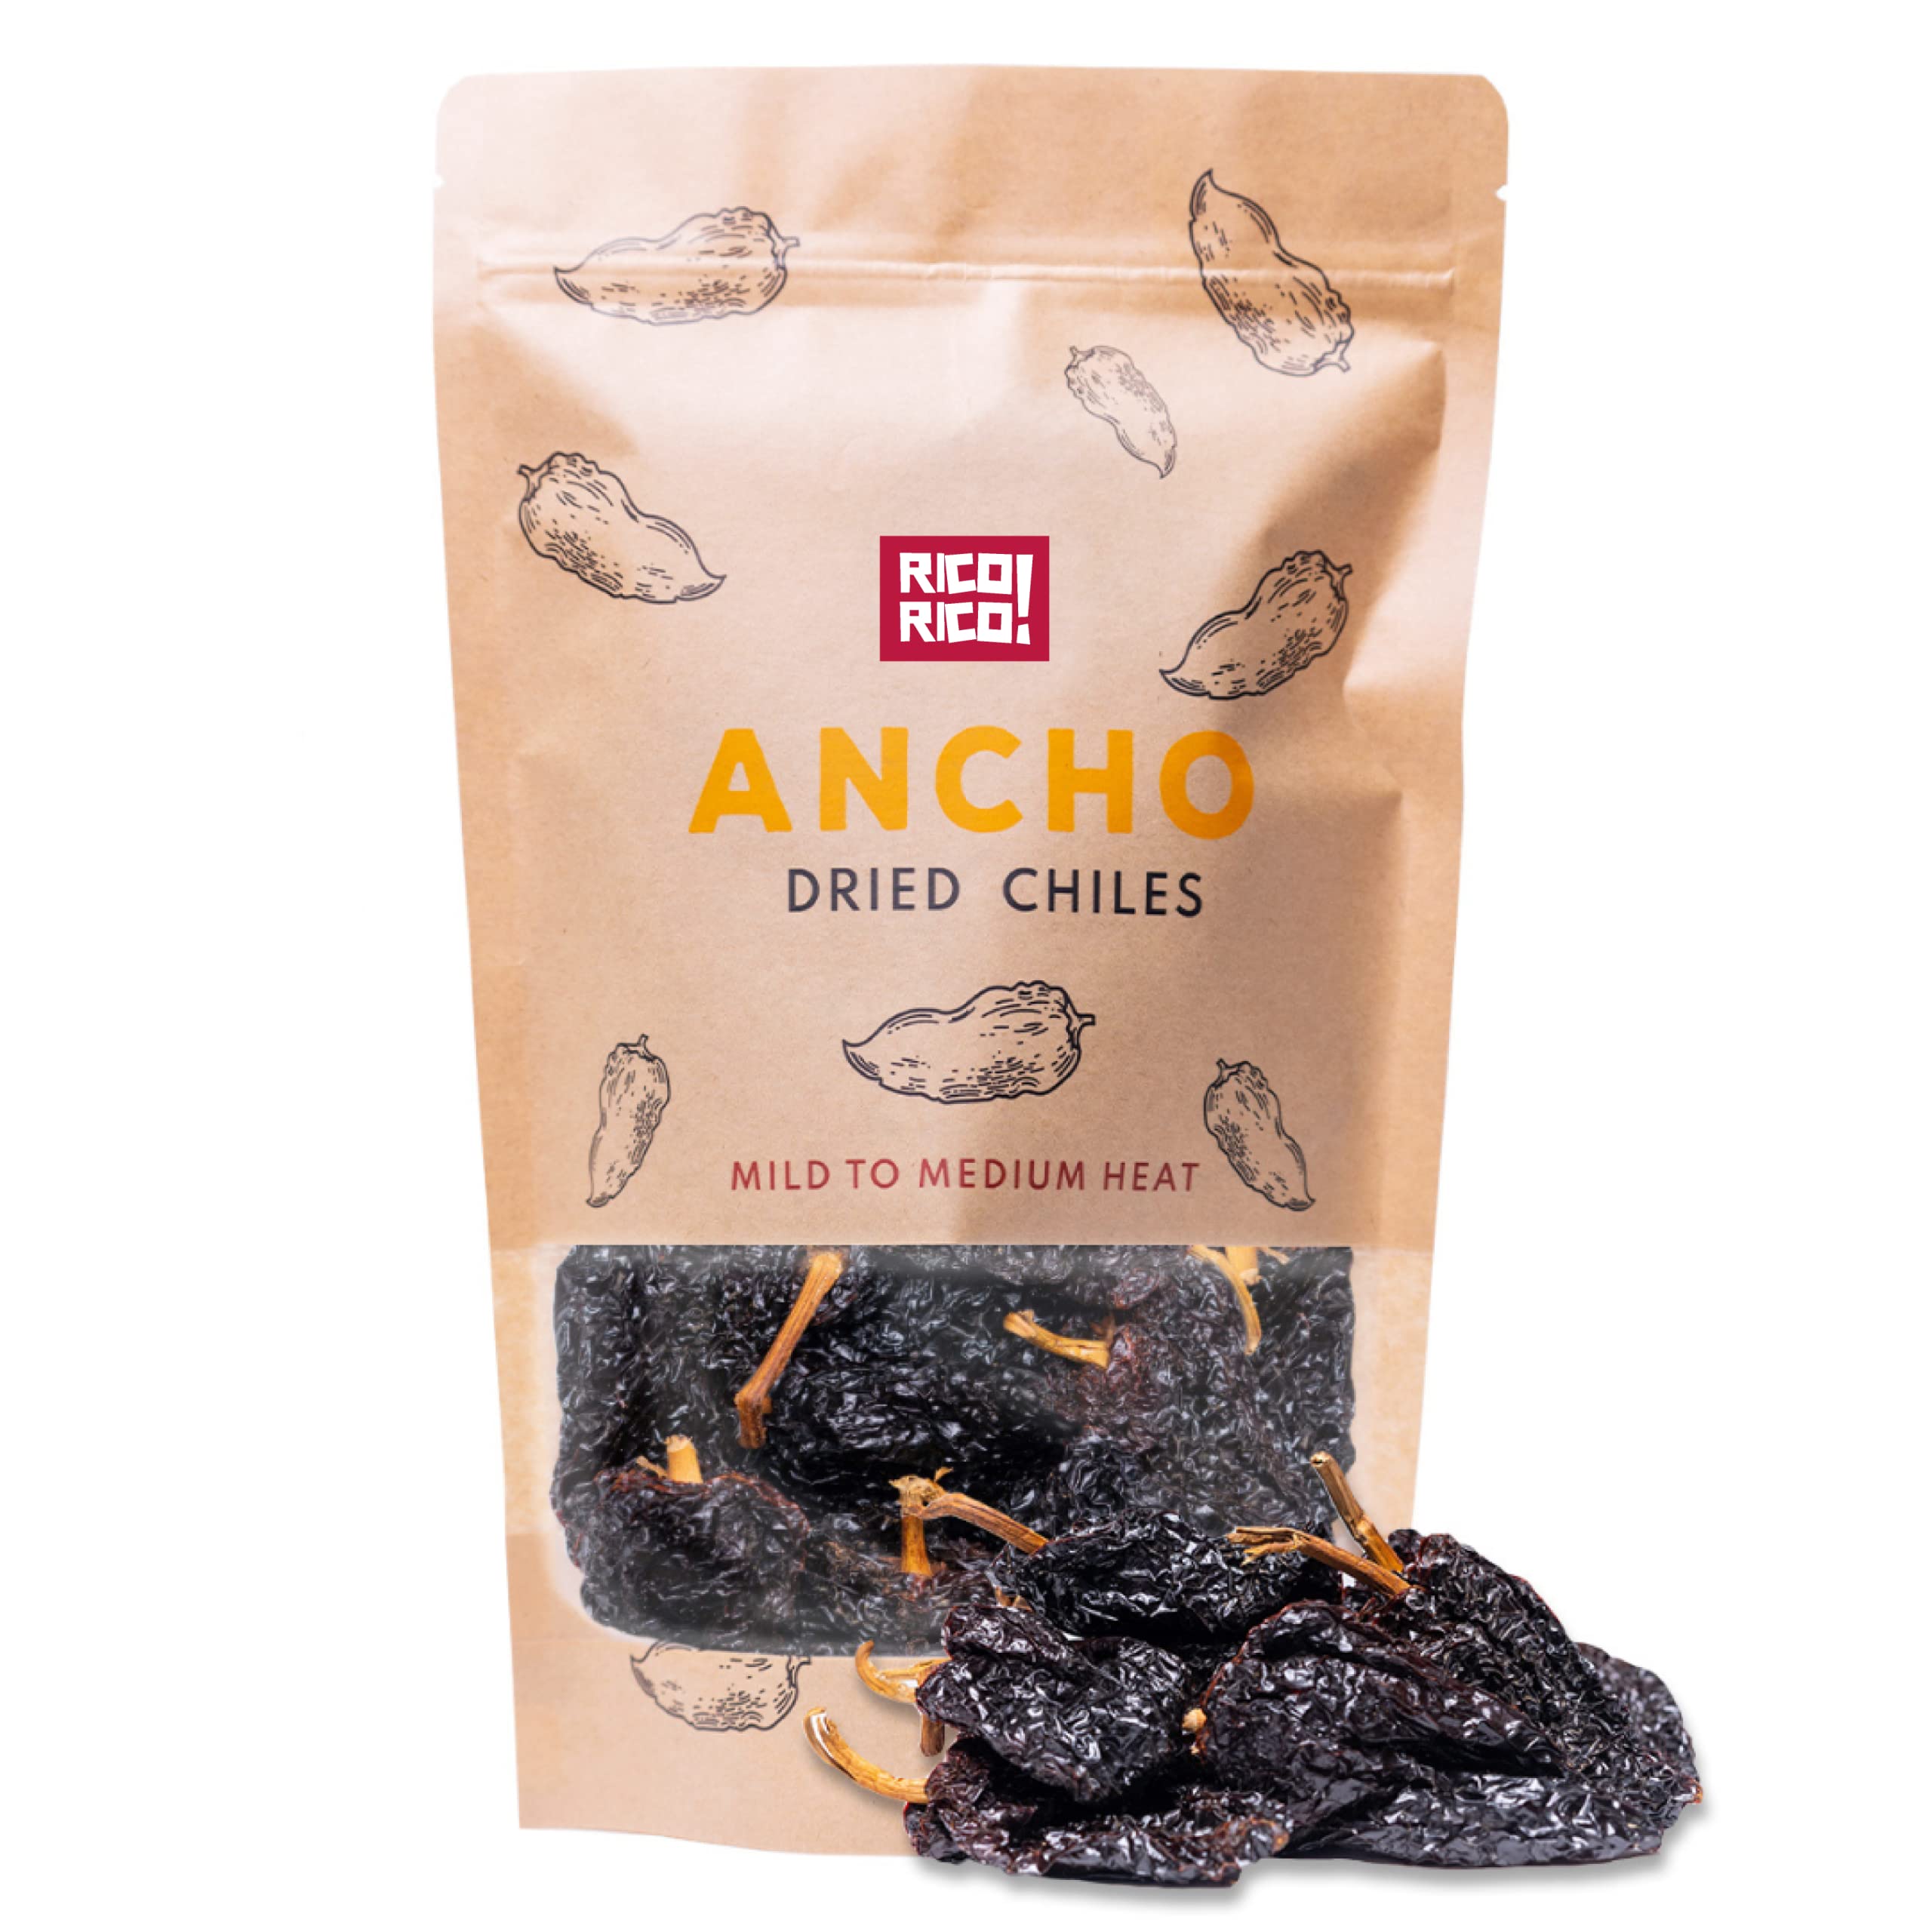 RICO RICO - Dried Ancho Chiles, 4 Oz - Premium Dried Chiles, Great for Birria Sauce, Mexican Mole, Enchiladas, Salsas, Pozole, Mild to Medium Heat, Sweet & Smoky Flavor. 100% Natural Dried Chili Peppers, Resealable in Kraft Bag by RICO RICO